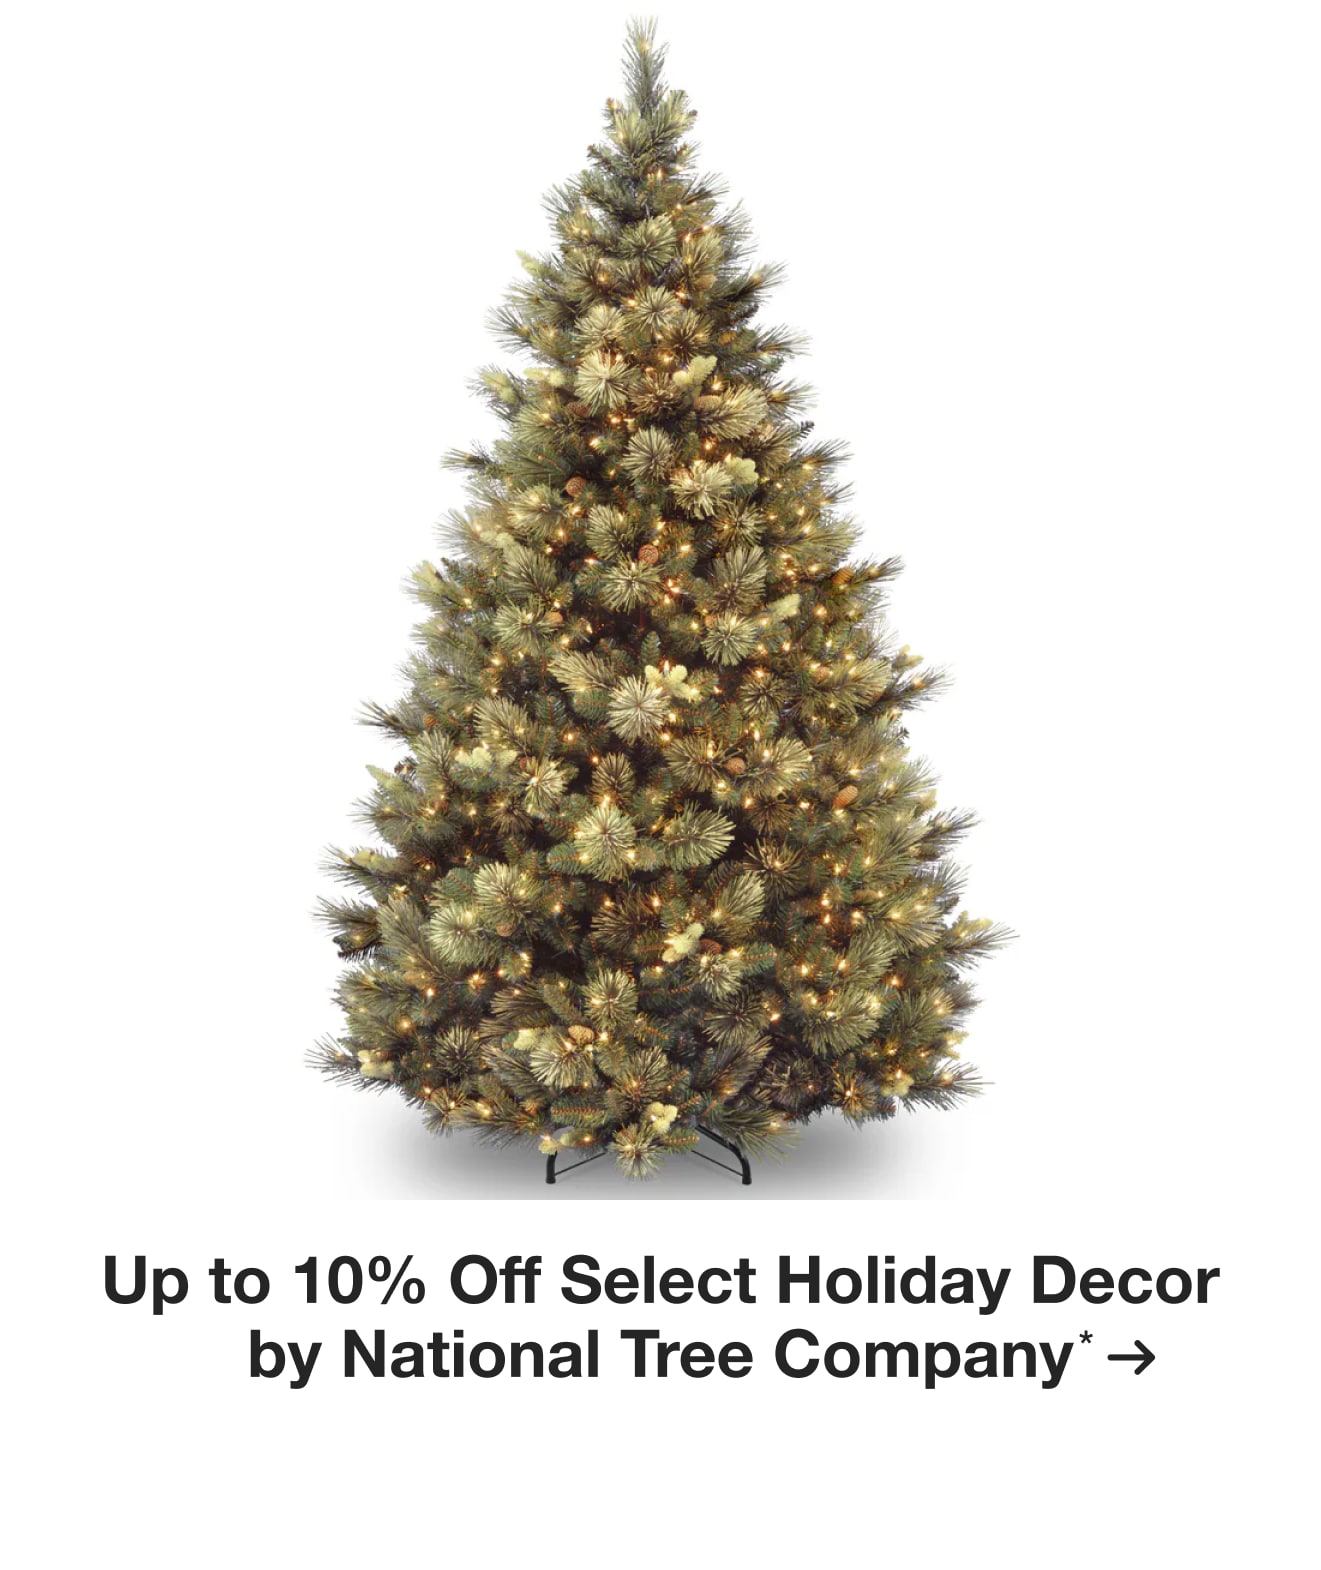 Up to 10% Off Select Holiday Decor by National Tree Company*